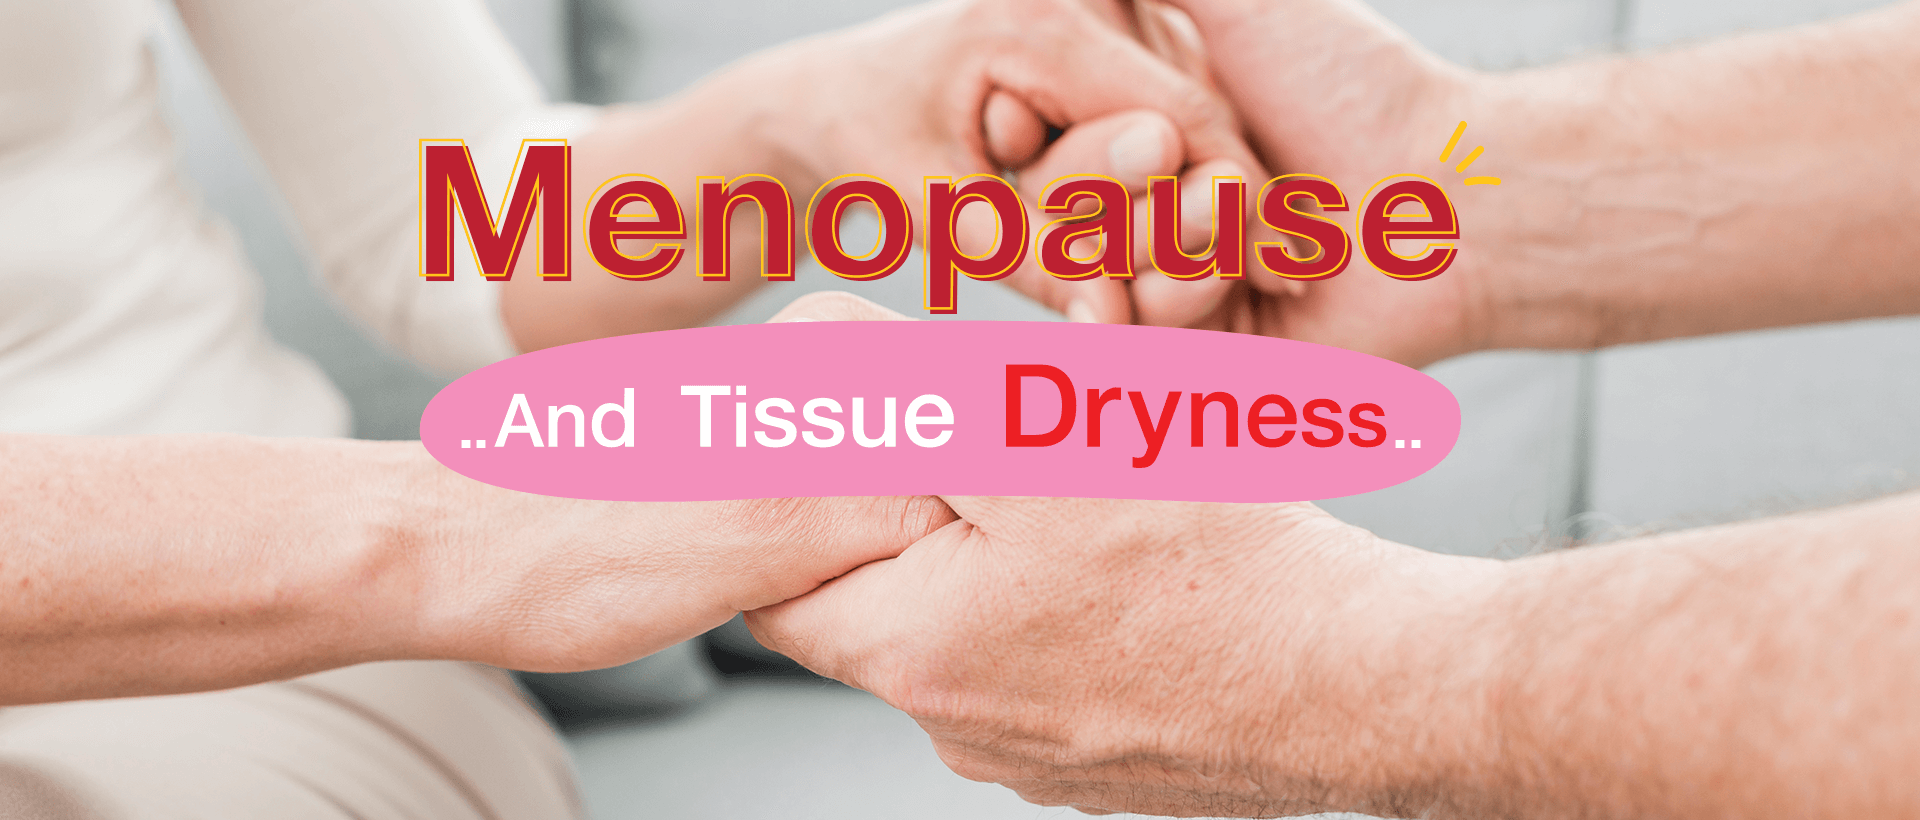 Menopause and tissue dryness